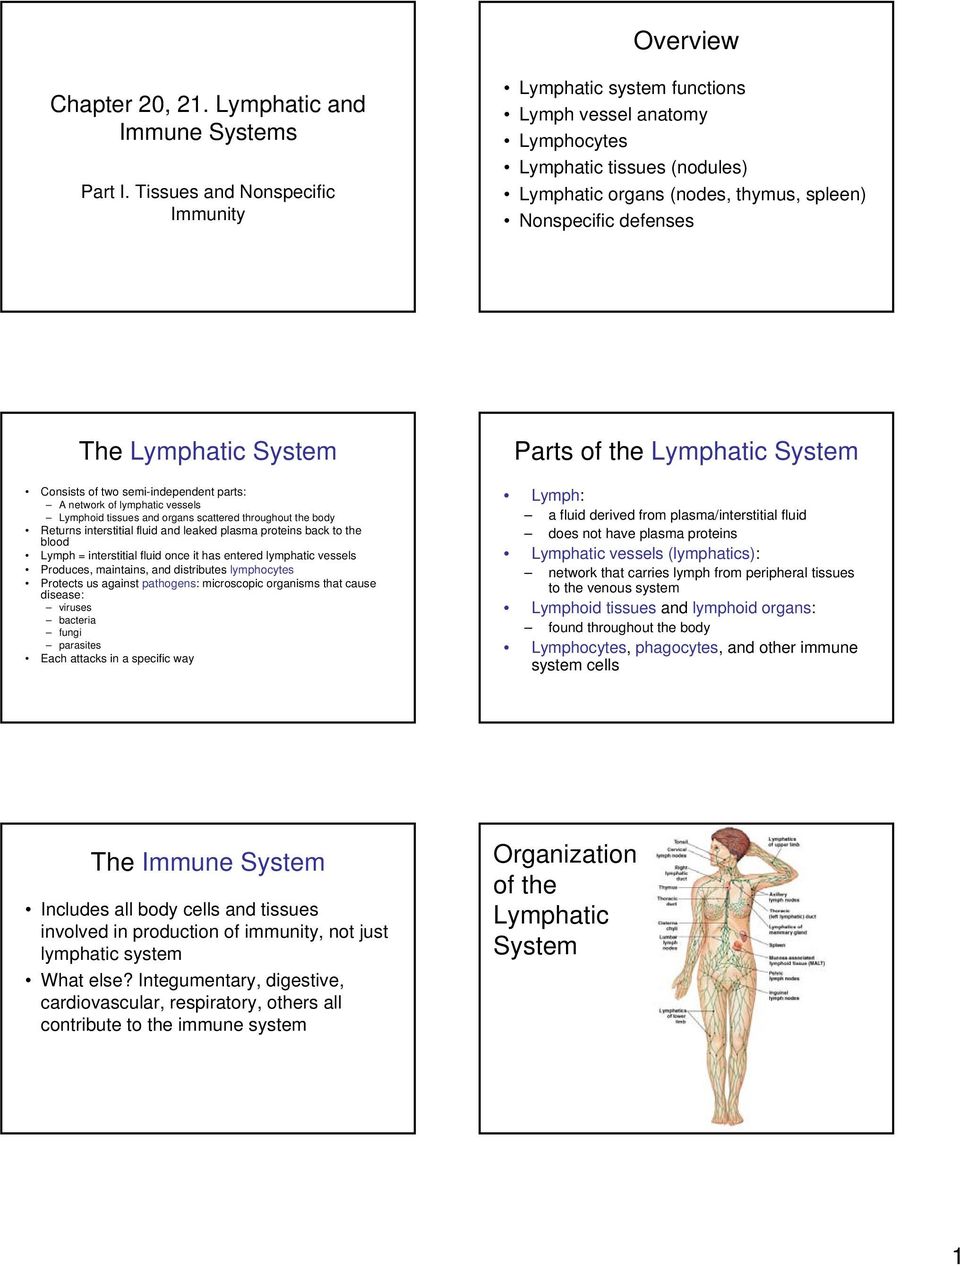 System Consists of two semi-independent parts: A network of lymphatic vessels Lymphoid tissues and organs scattered throughout the body Returns interstitial fluid and leaked plasma proteins back to